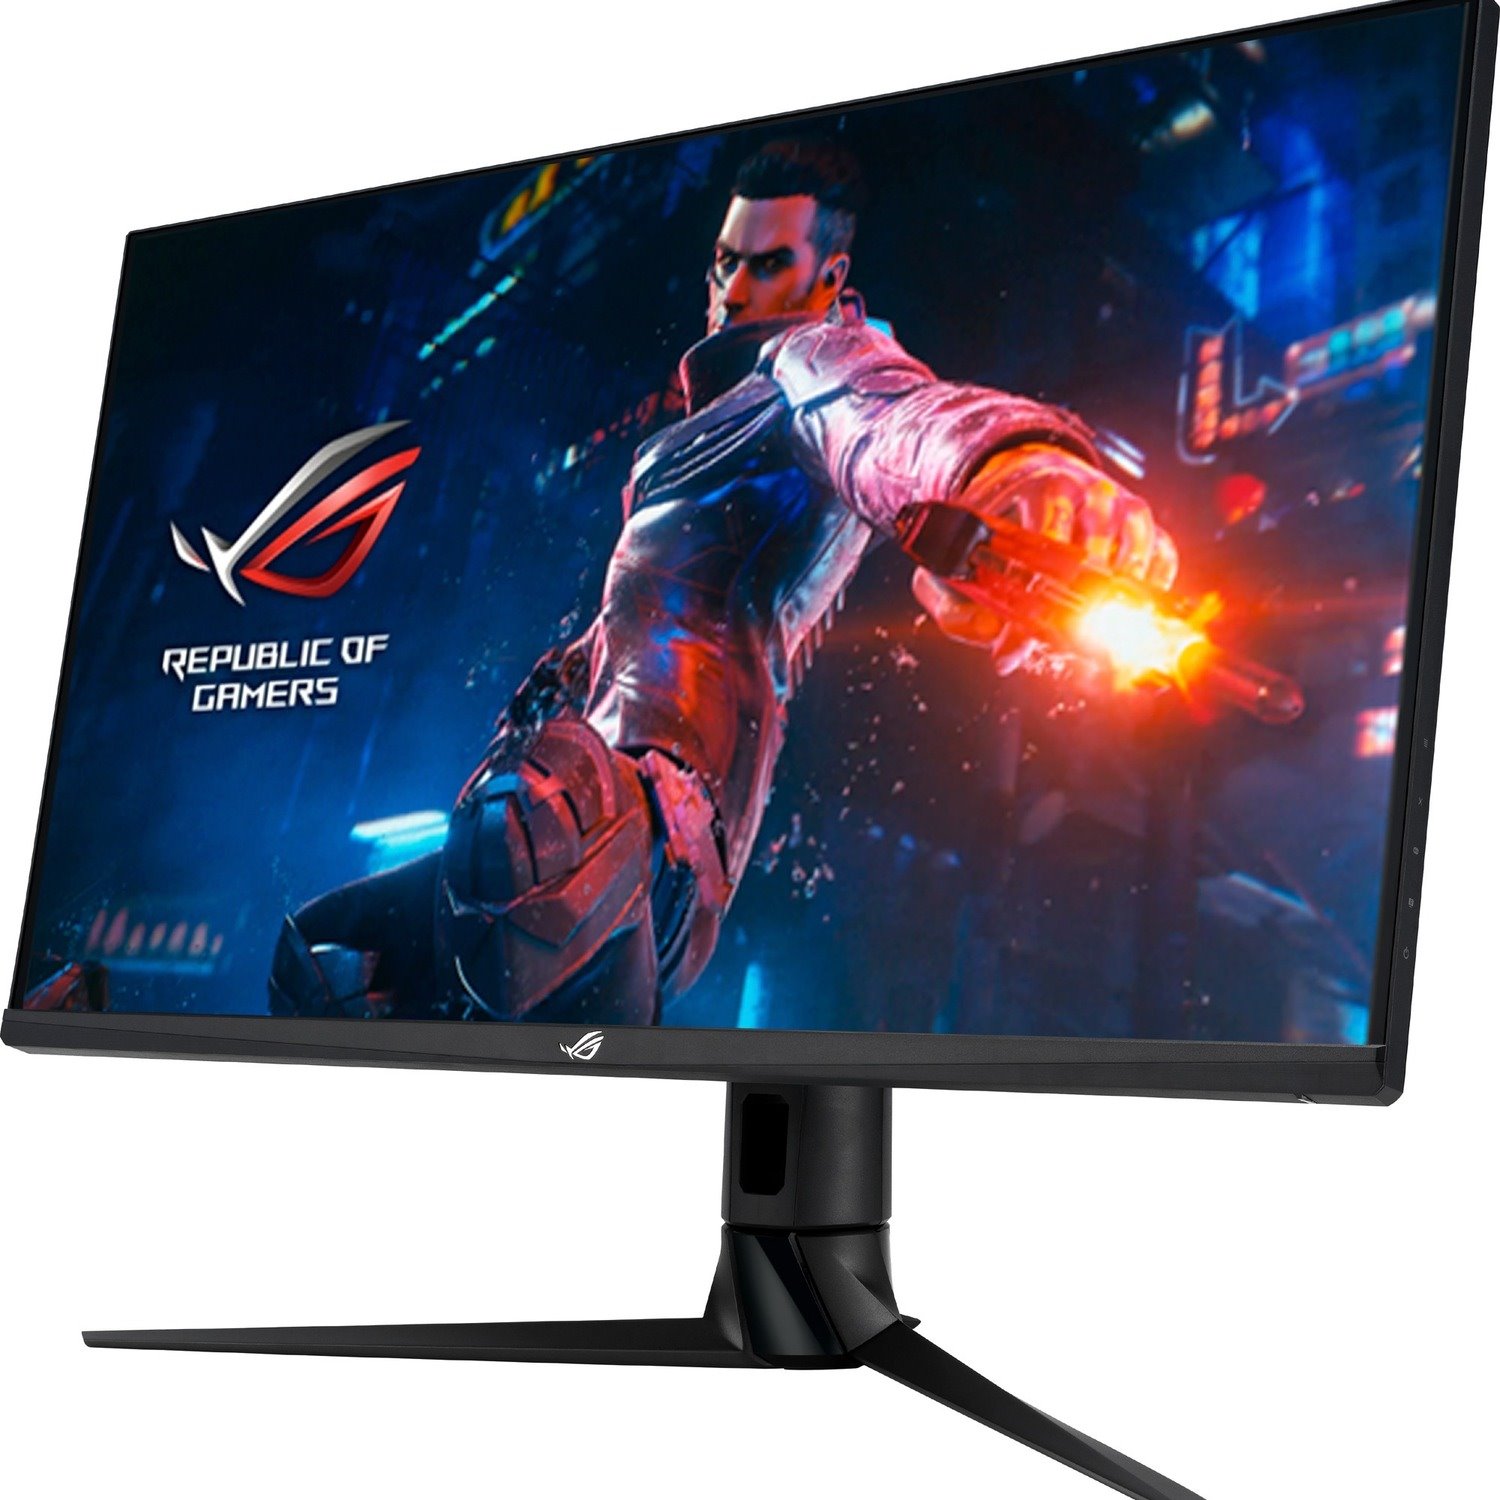 ASUS ROG Swift 32" 1440P Gaming Monitor (PG329Q) - QHD?(2560 x 1440), Fast IPS, 175Hz (Supports 144Hz), 1ms, G-SYNC Compatible, Extreme Low Motion Blur Sync, HDMI, DisplayPort, USB, DisplayHDR 600